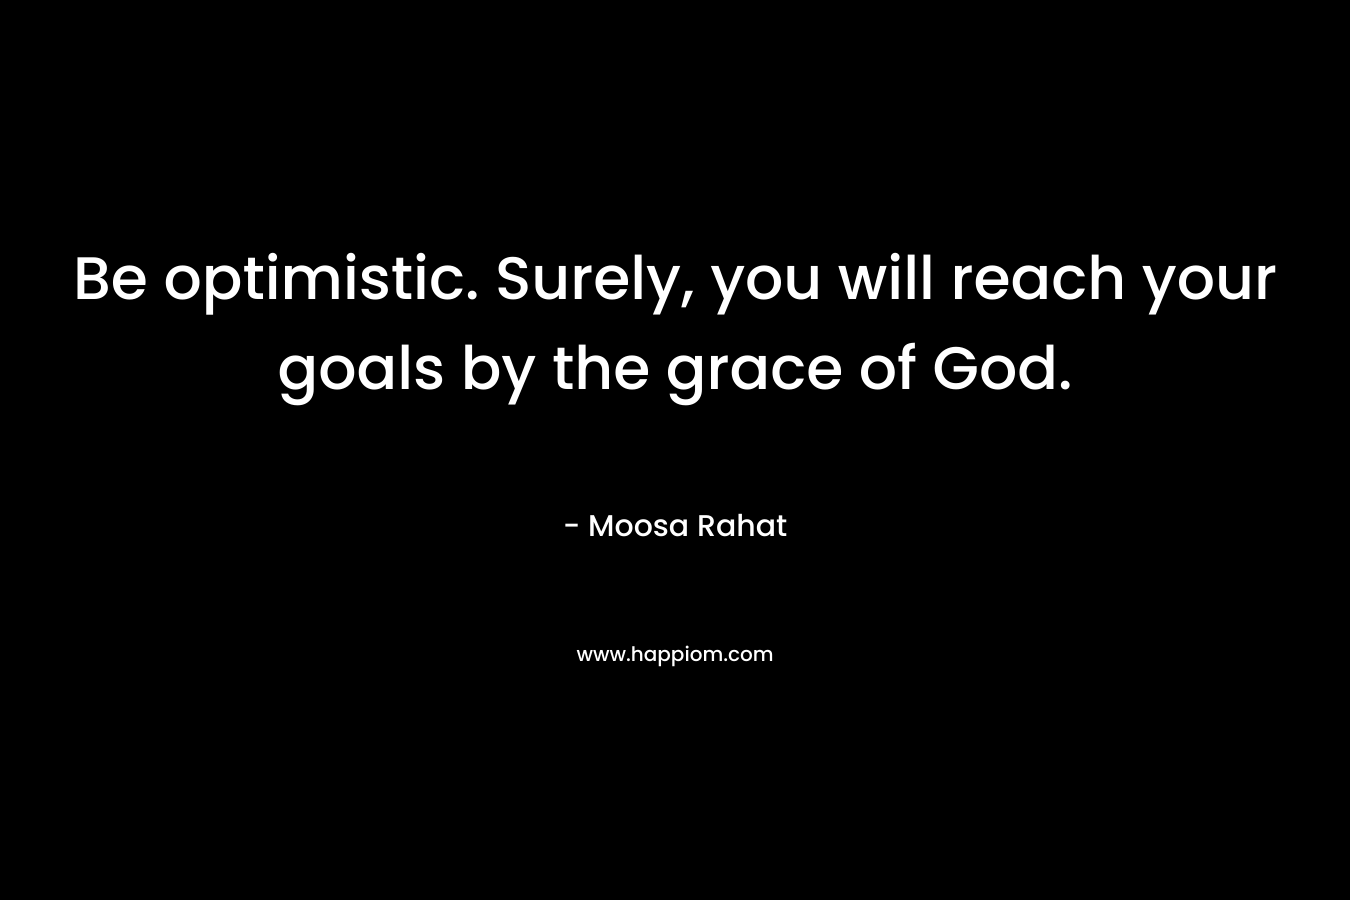 Be optimistic. Surely, you will reach your goals by the grace of God. – Moosa Rahat